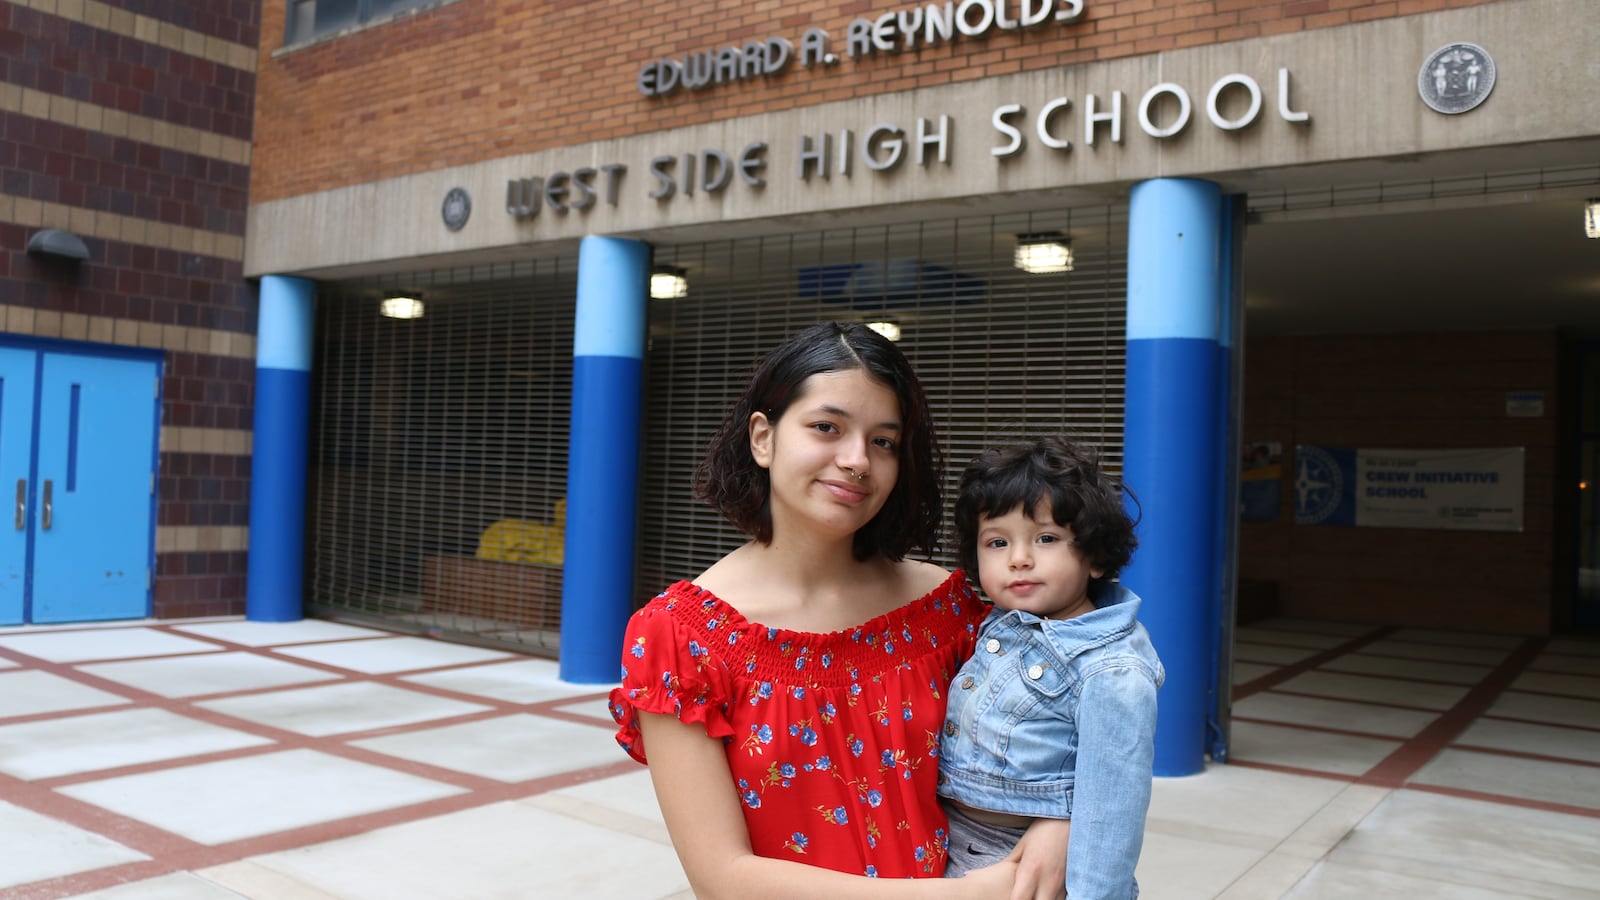 A woman in a red shirt holds a small child in a jean jacket in front of a brick school building with blue pillars. 